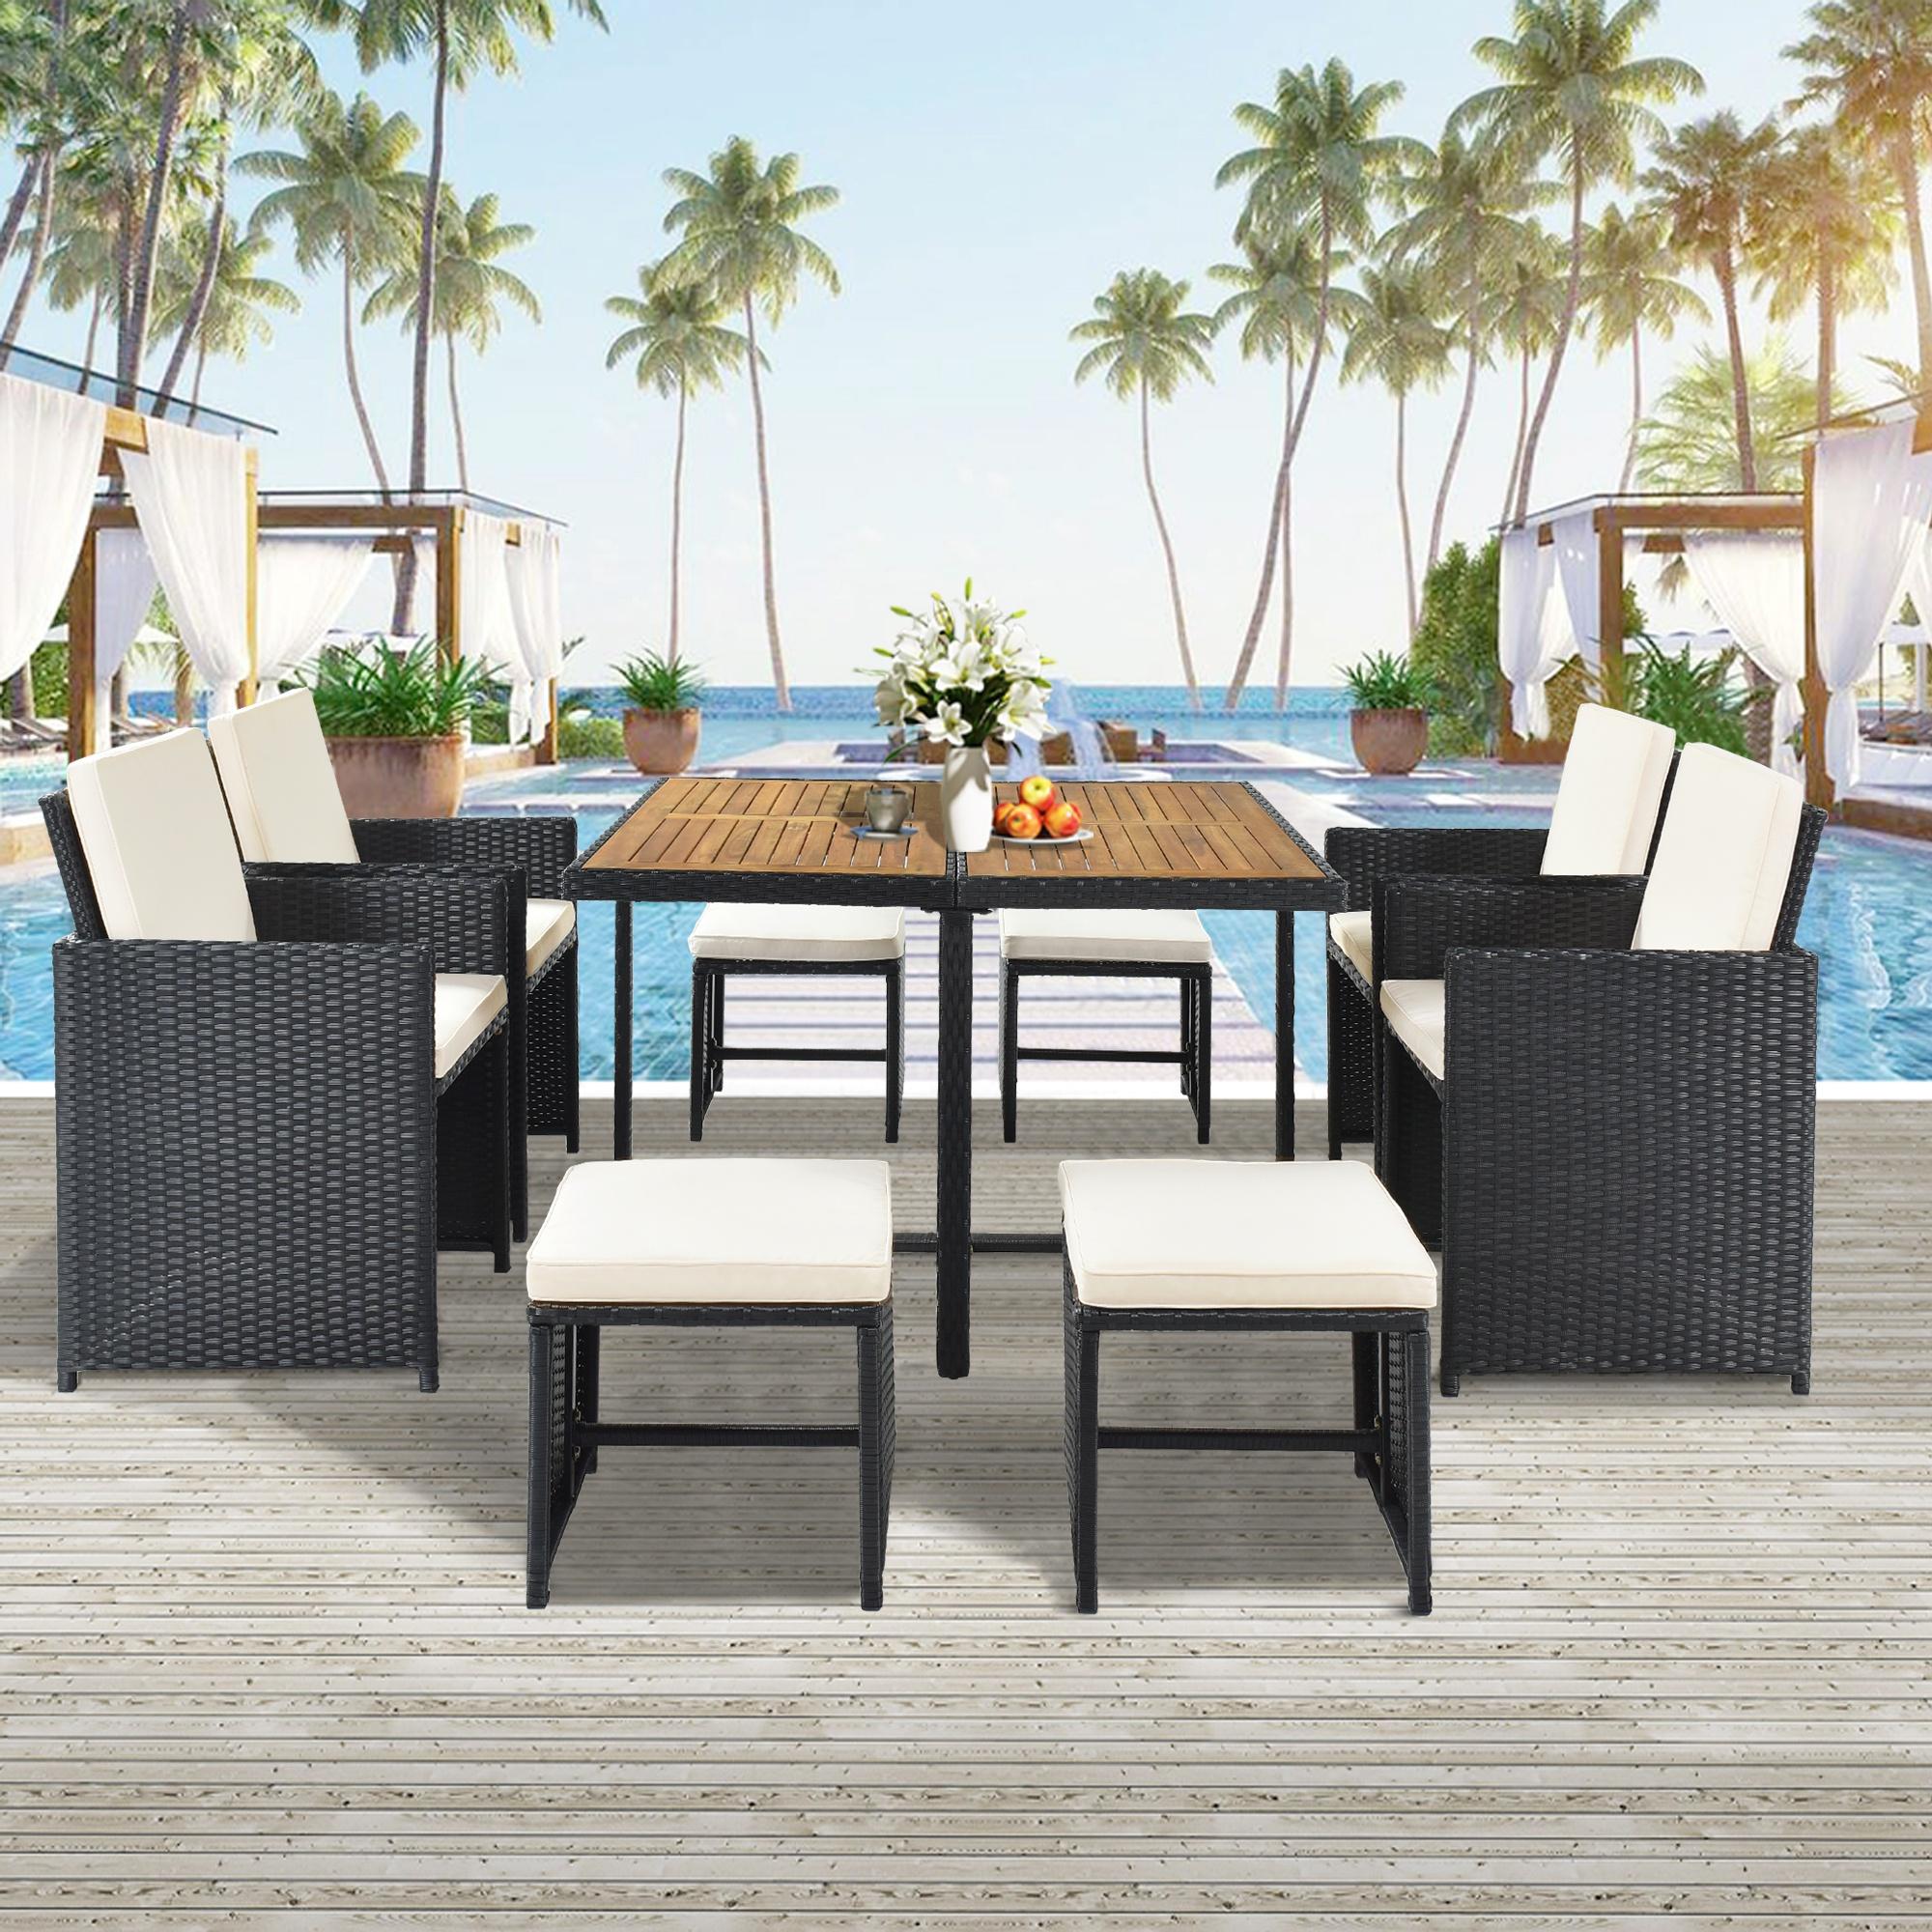 9 PCS Indoor Outdoor Wicker Dining Set Furniture, Patio Rattan Furniture Set with Acacia Wood Tabletop and Stackable Armrest Chairs, All Weather Wicker Sectional Conversation Set with Cushions - image 2 of 9